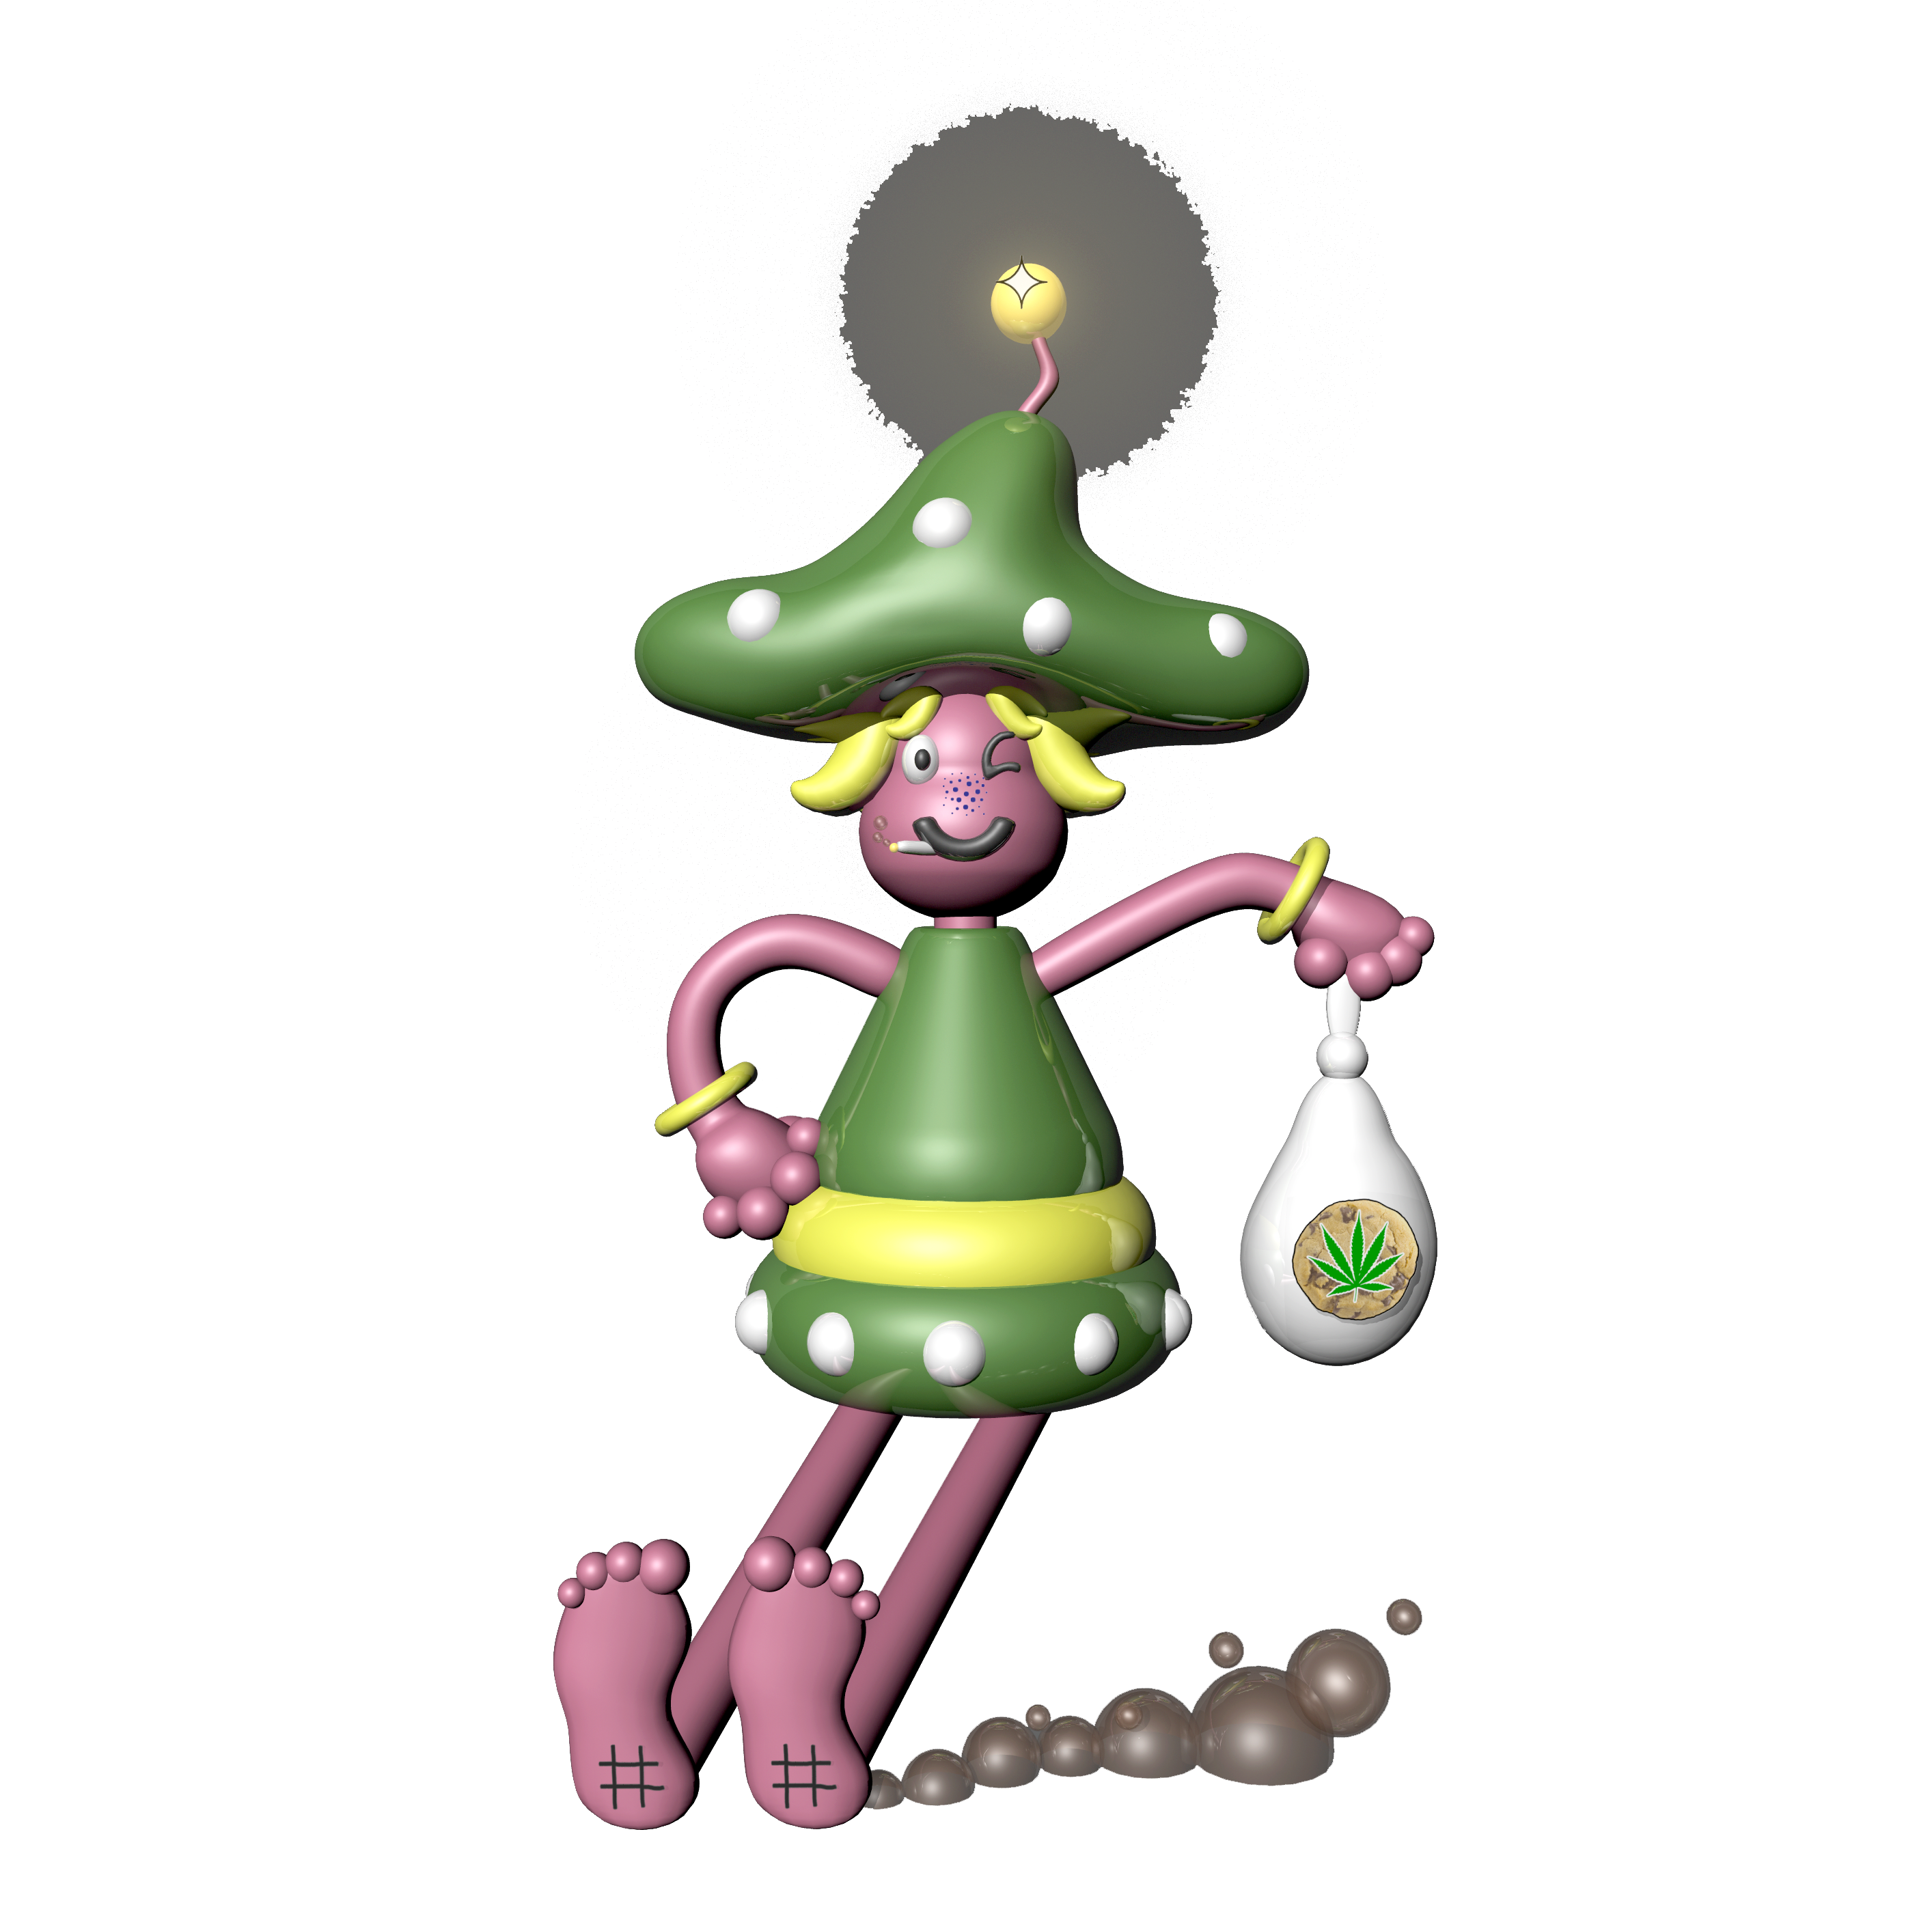 3D stylized chracter with a mushroom shaped hat, blonde hair and a green dress with a bag of cookies in one hand